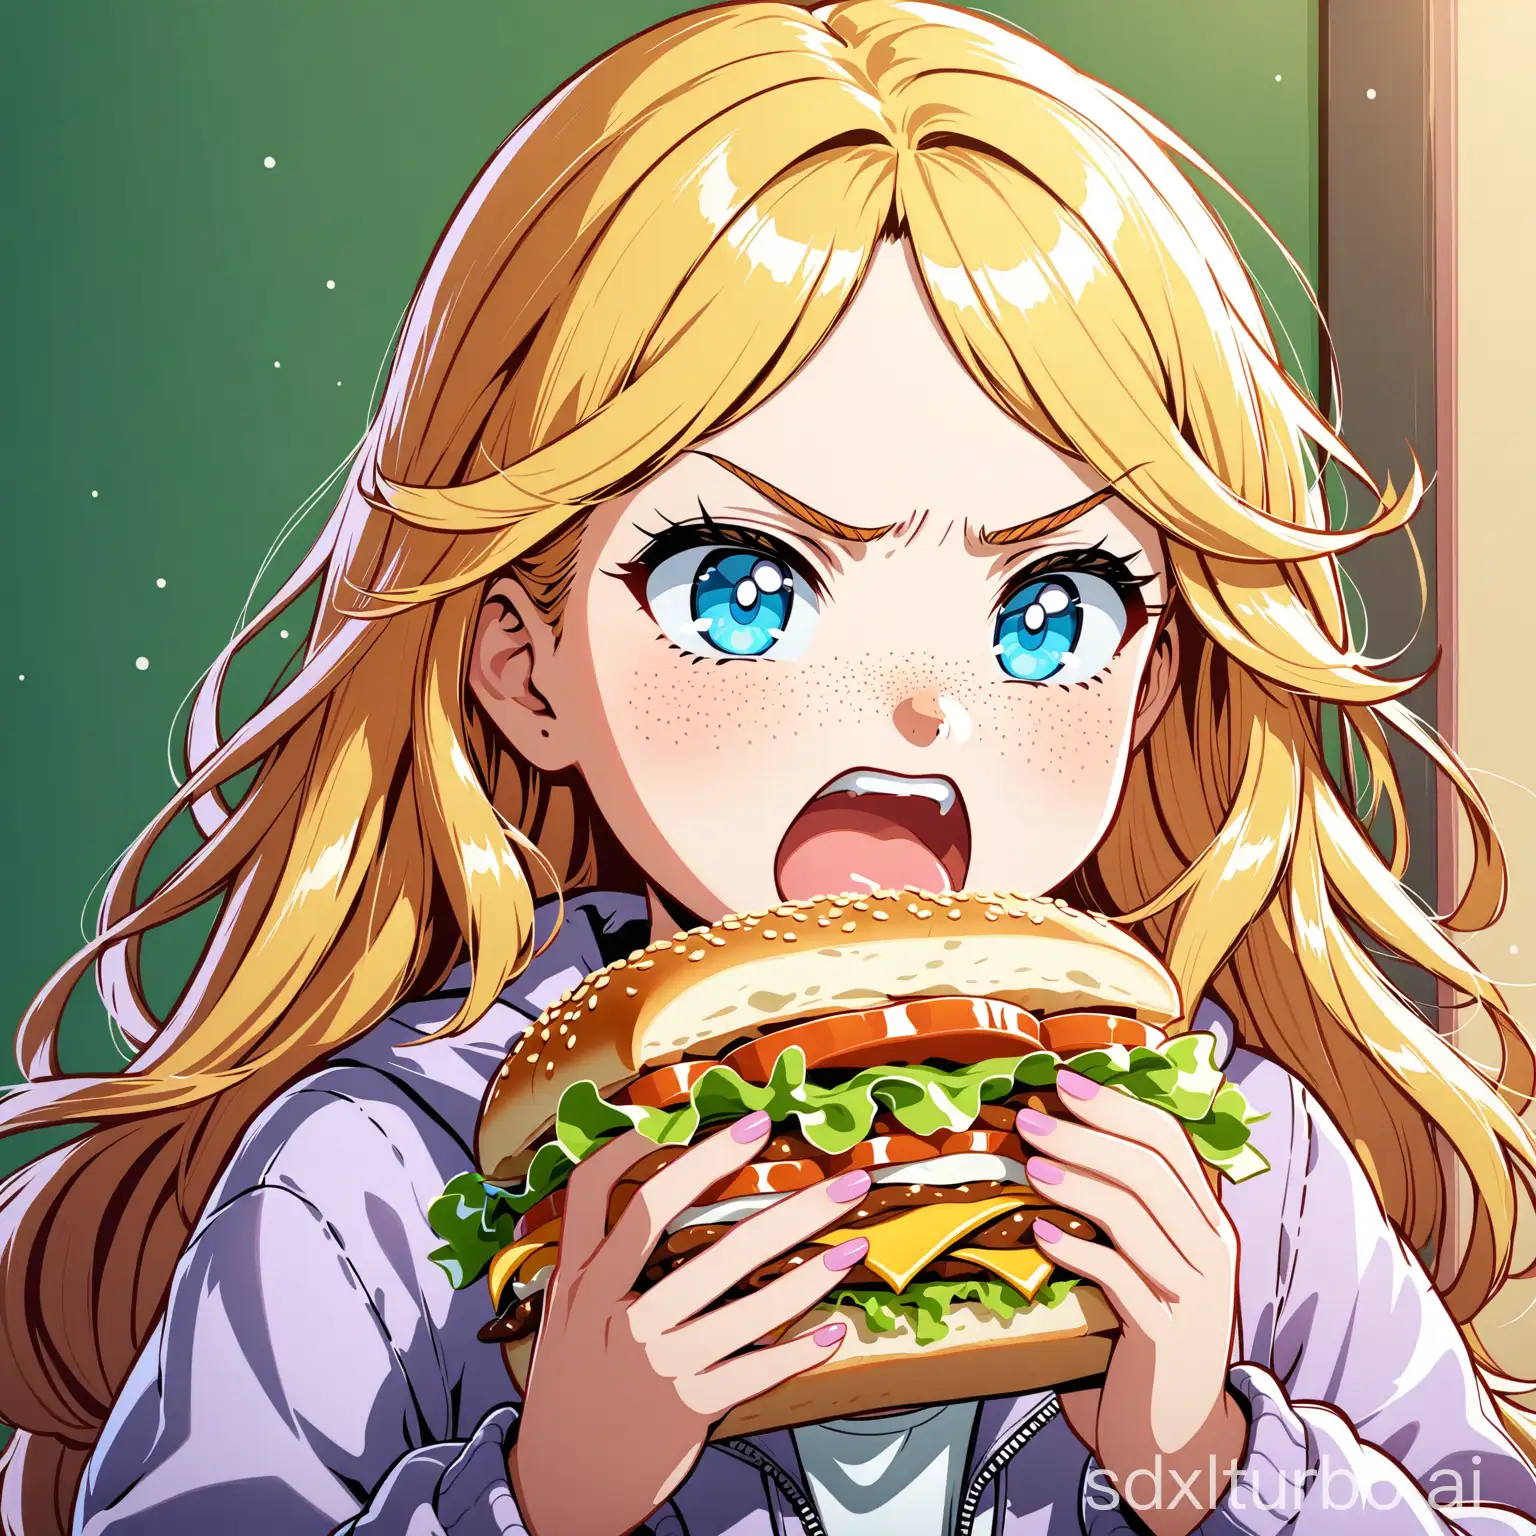 Angry-Blonde-Girl-in-University-Jacket-Eating-Sandwich